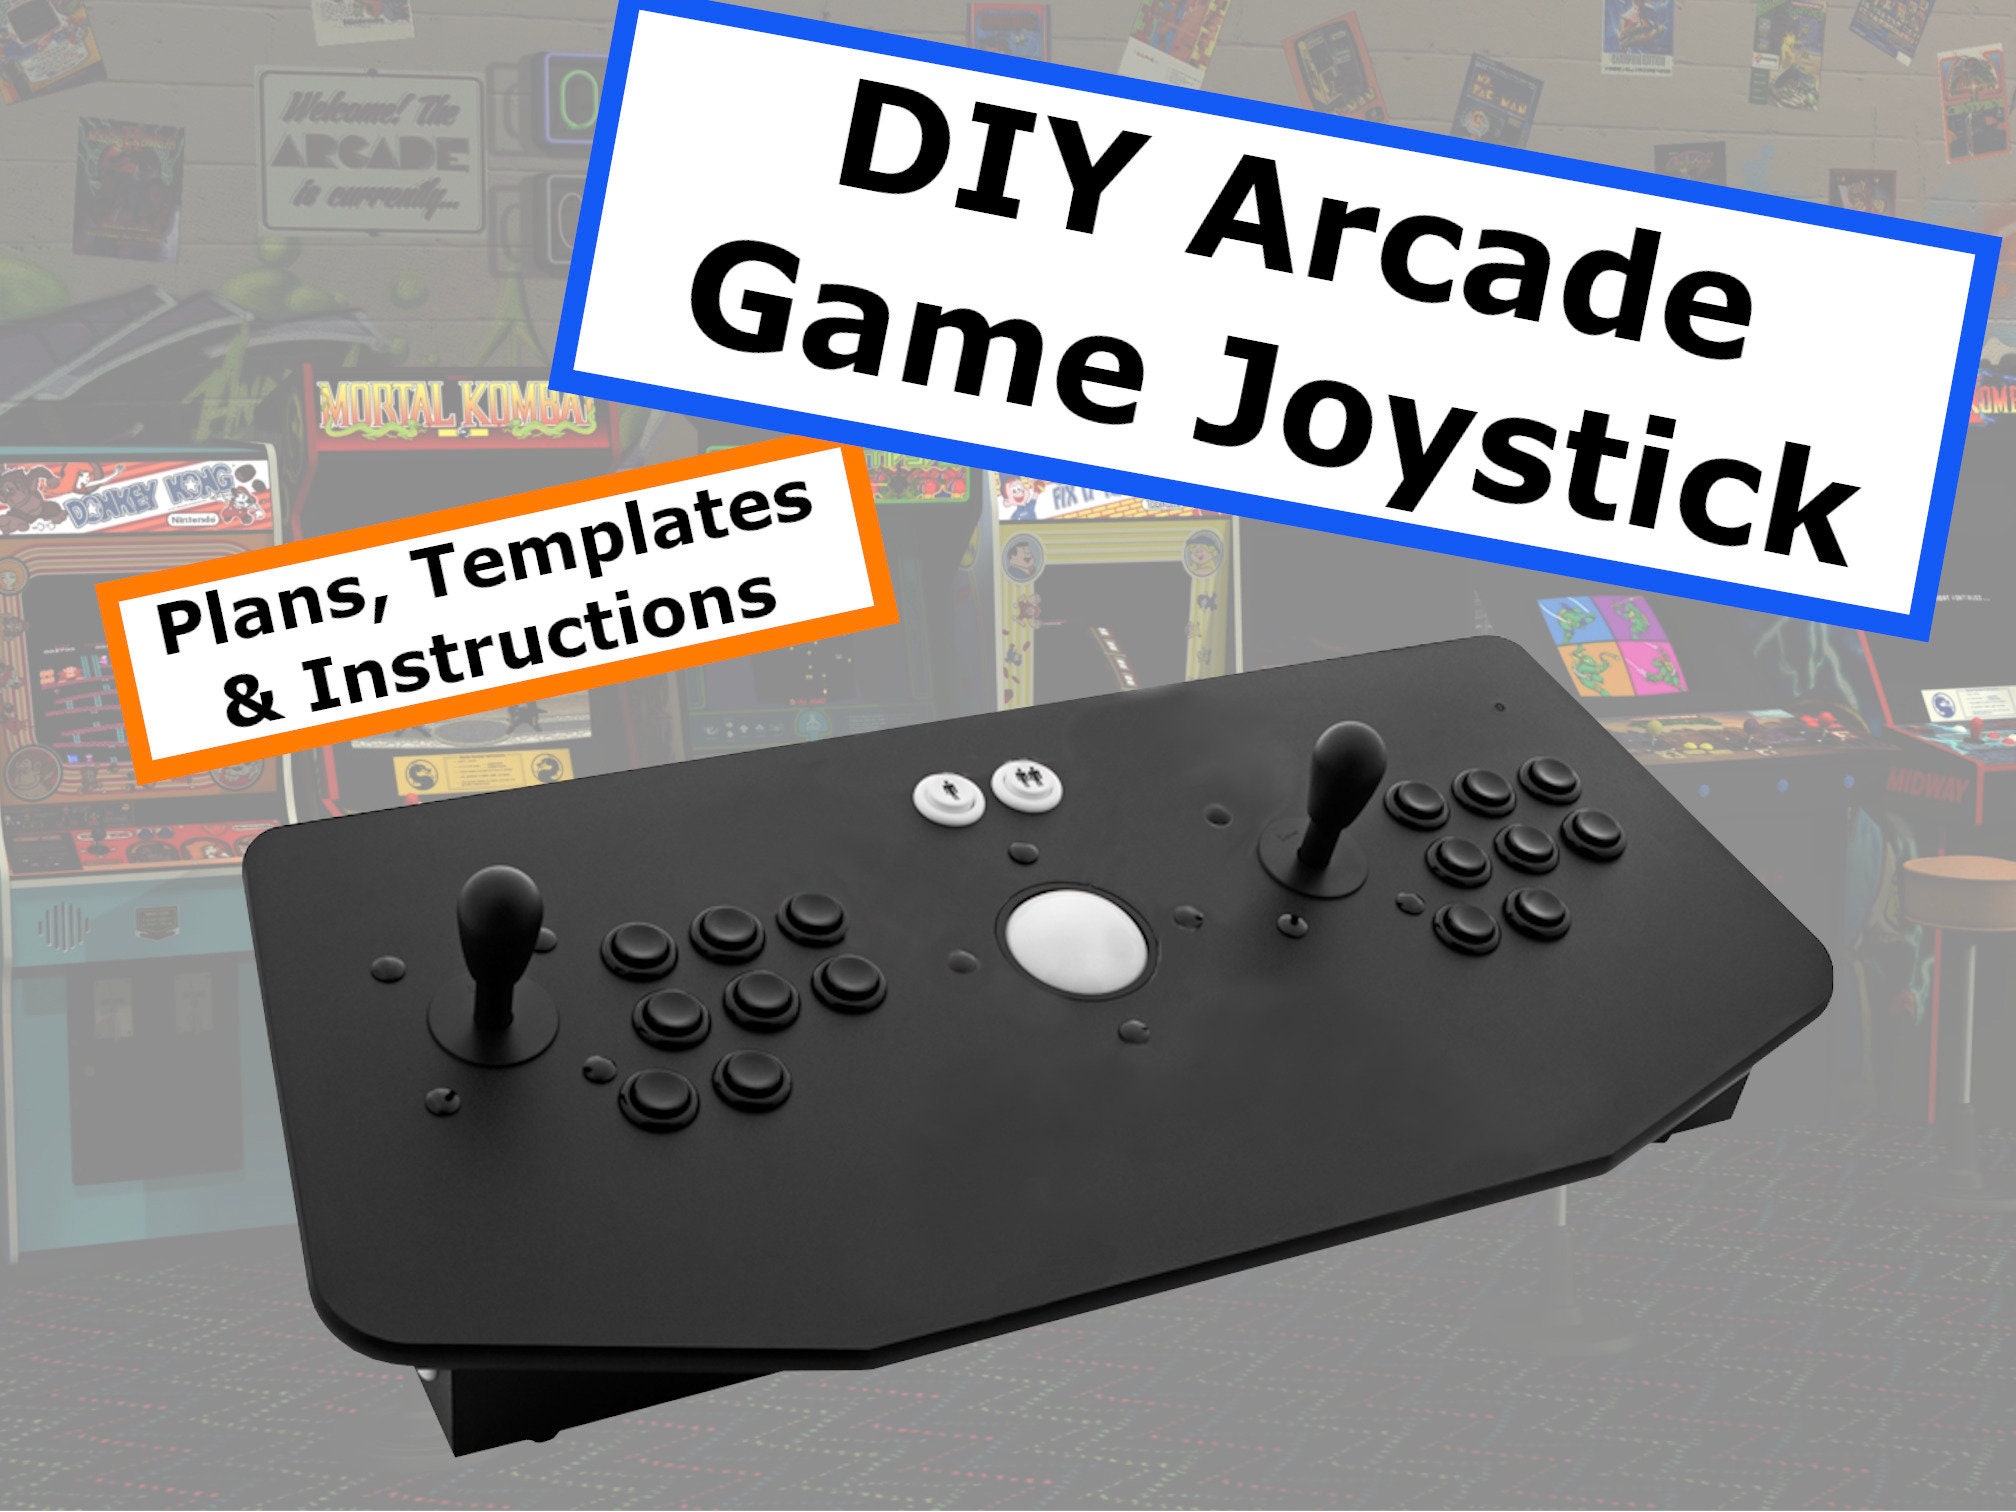 Controller Stick Plans for Arcade Cabinet Build Your - Etsy